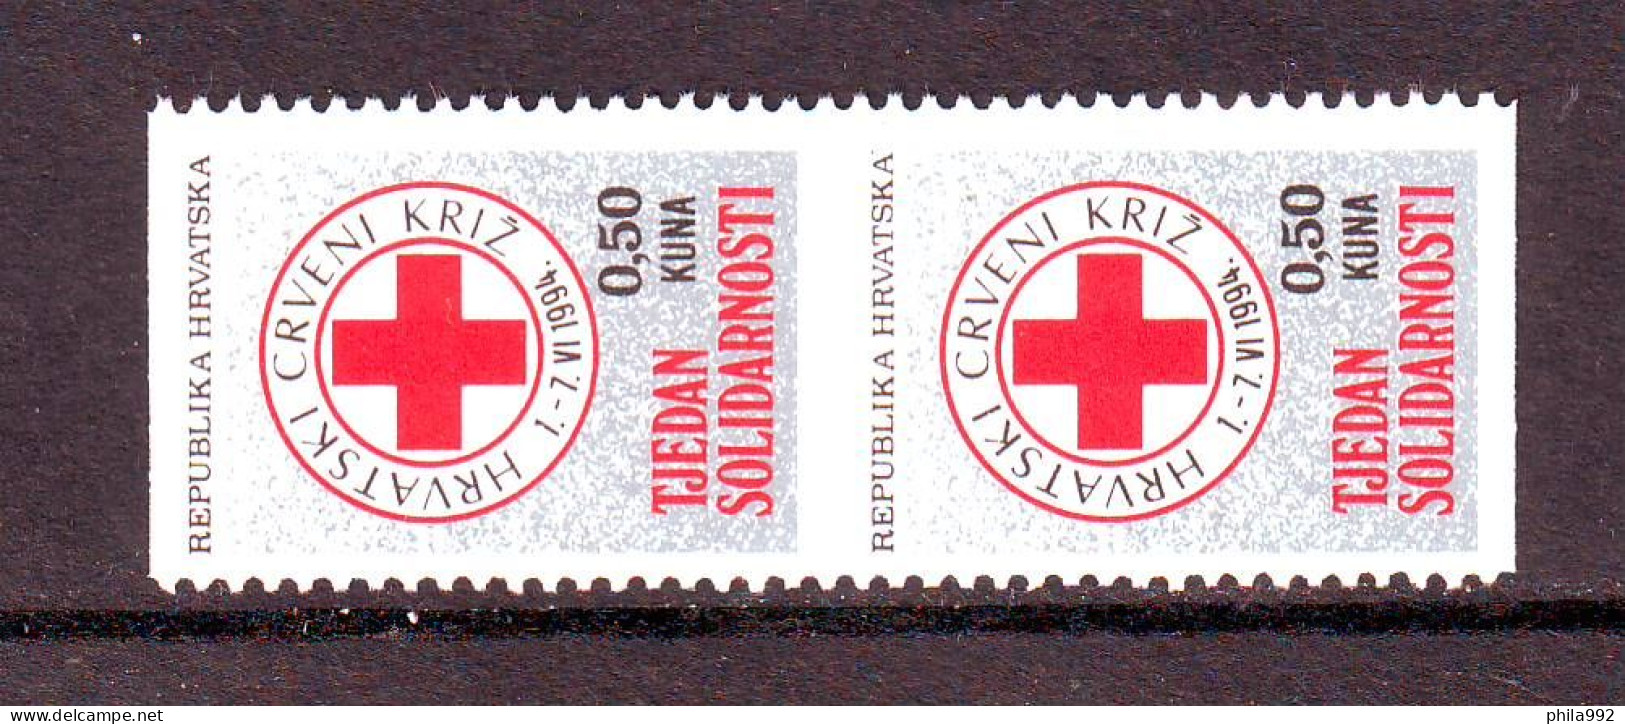 Croatia 1994 Charity Stamp Mi.No.34 RED CROSS Solidarity A Pair Without Horizontal Serrations MNH - Kroatië